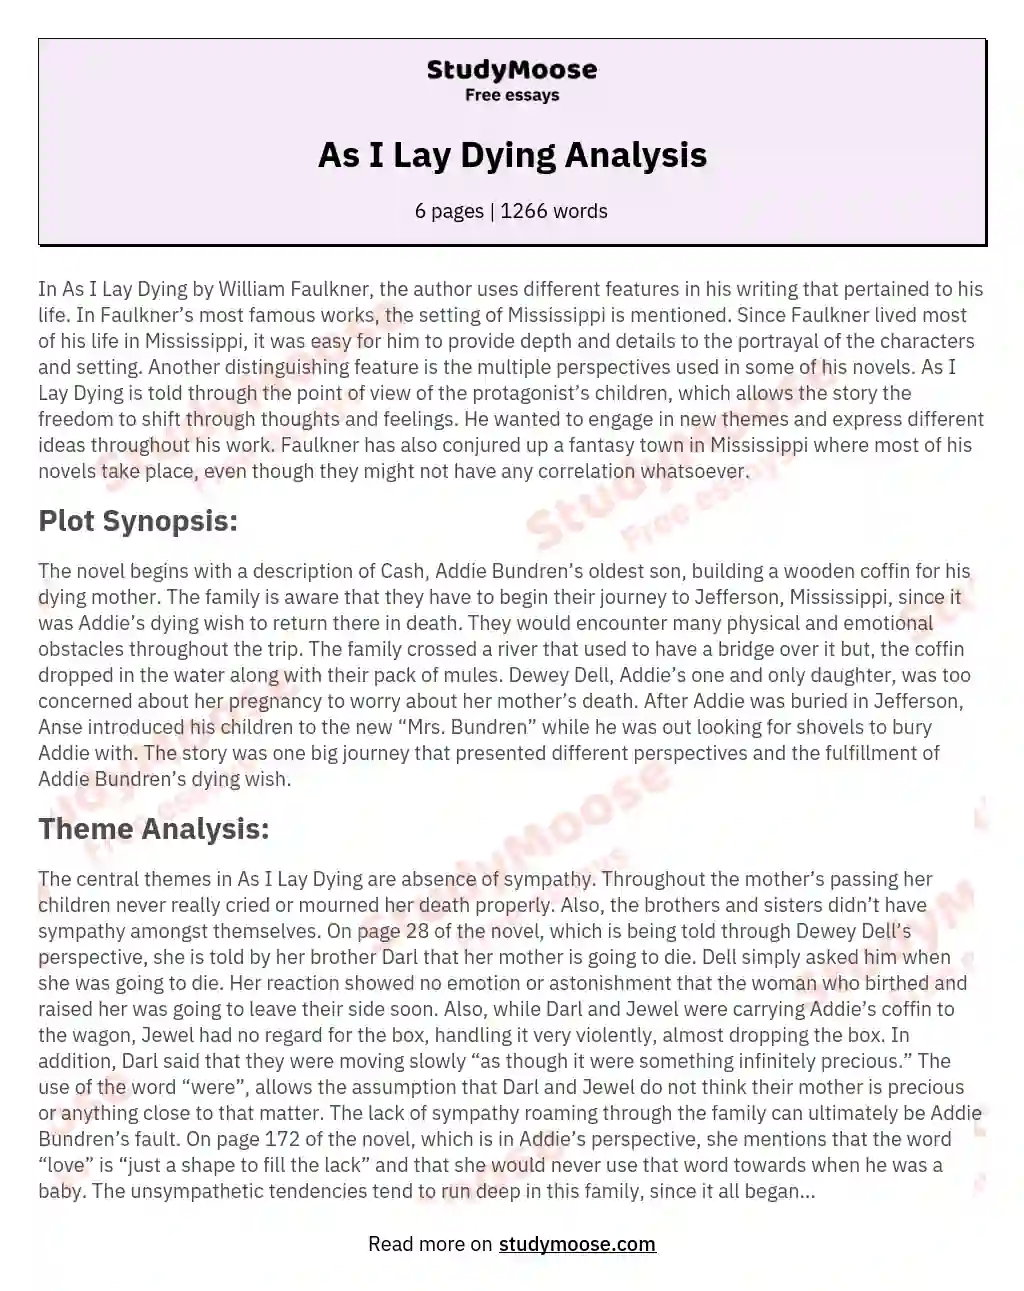 as i lay dying literary analysis essay